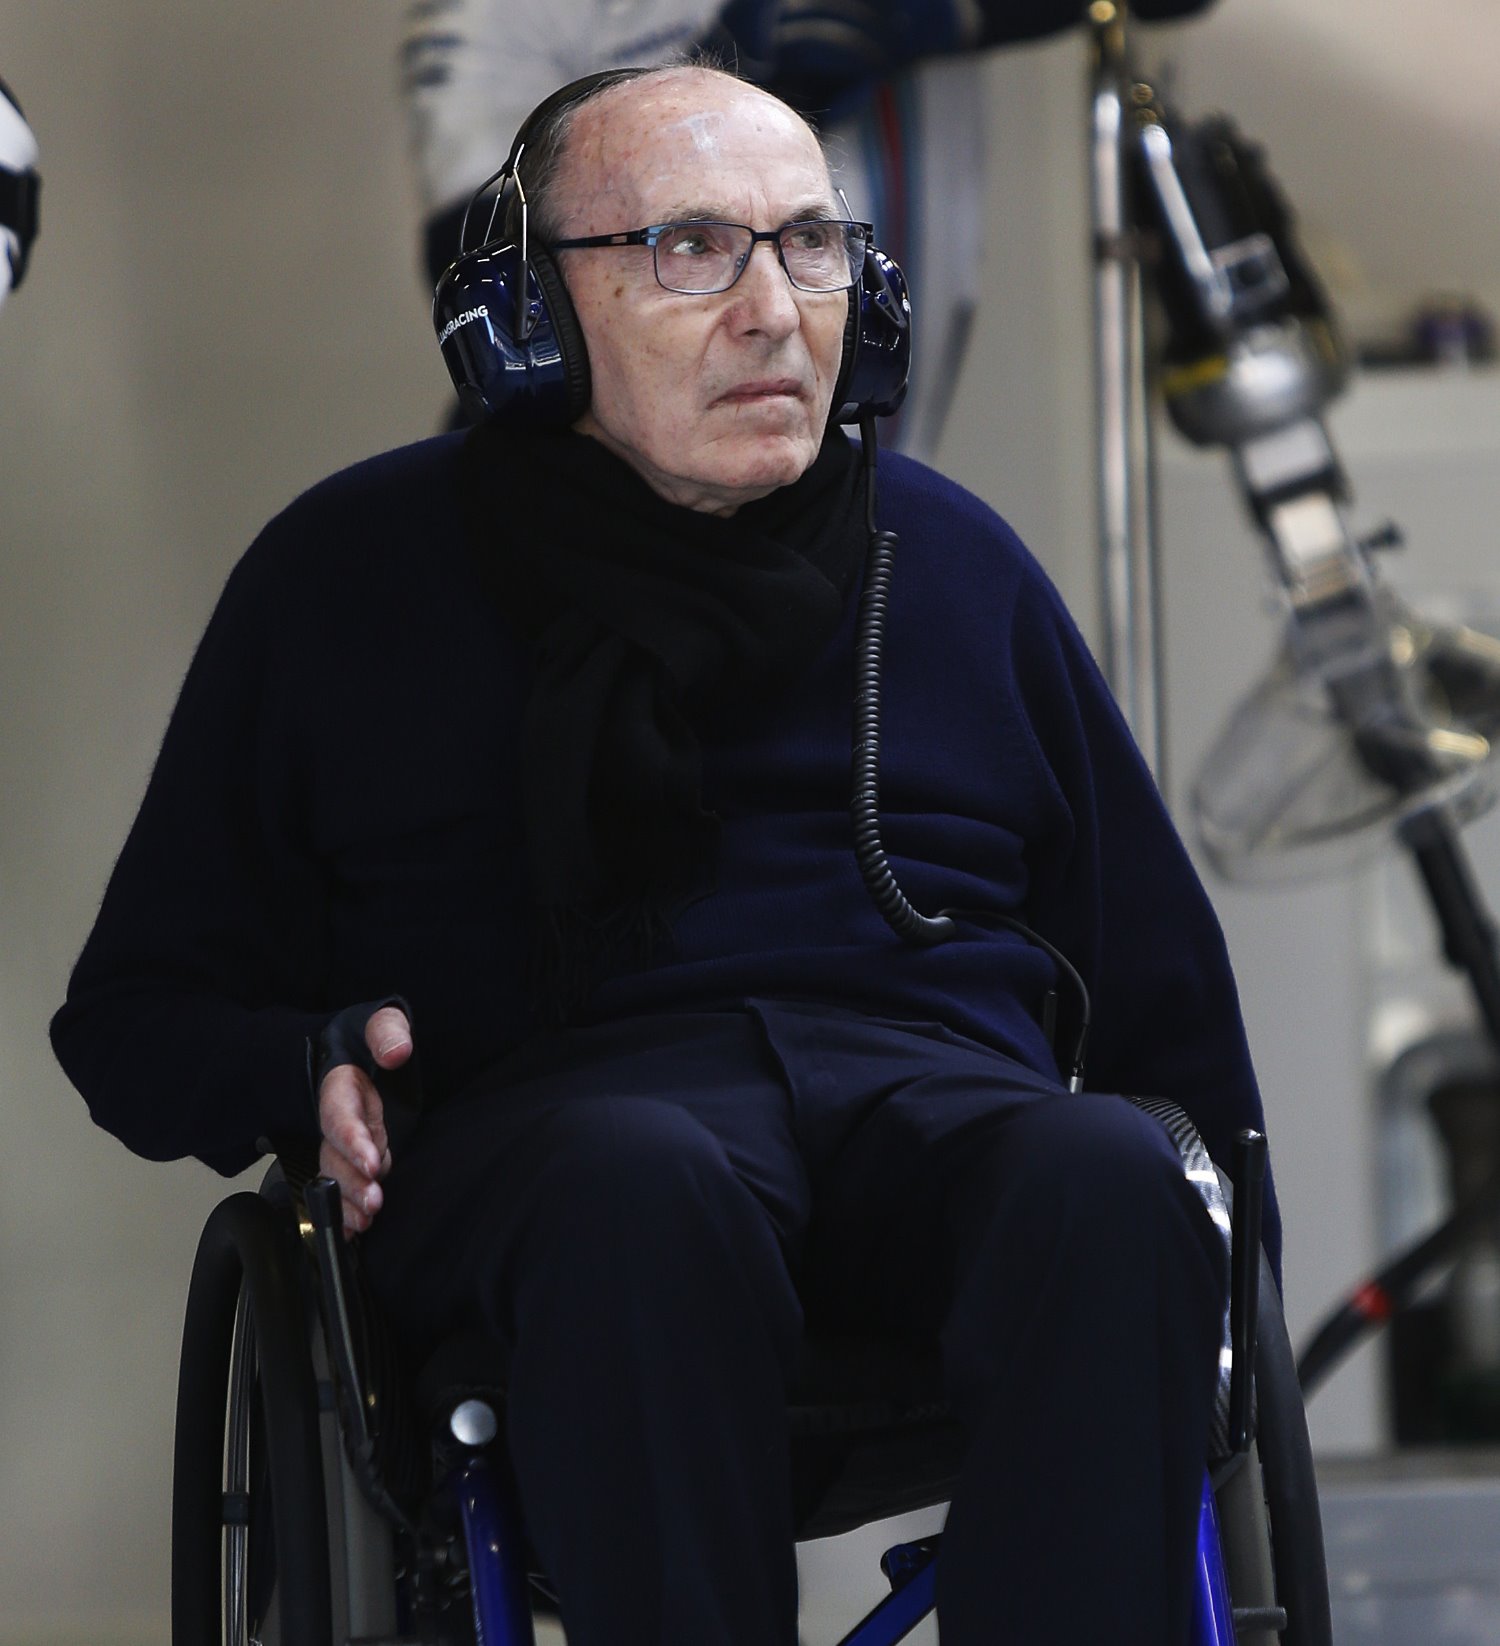 Frank Williams - despite winning races recently, his team is bleeding money due to the high cost of the hybrid F1 engines that the paying customers (fans) hate